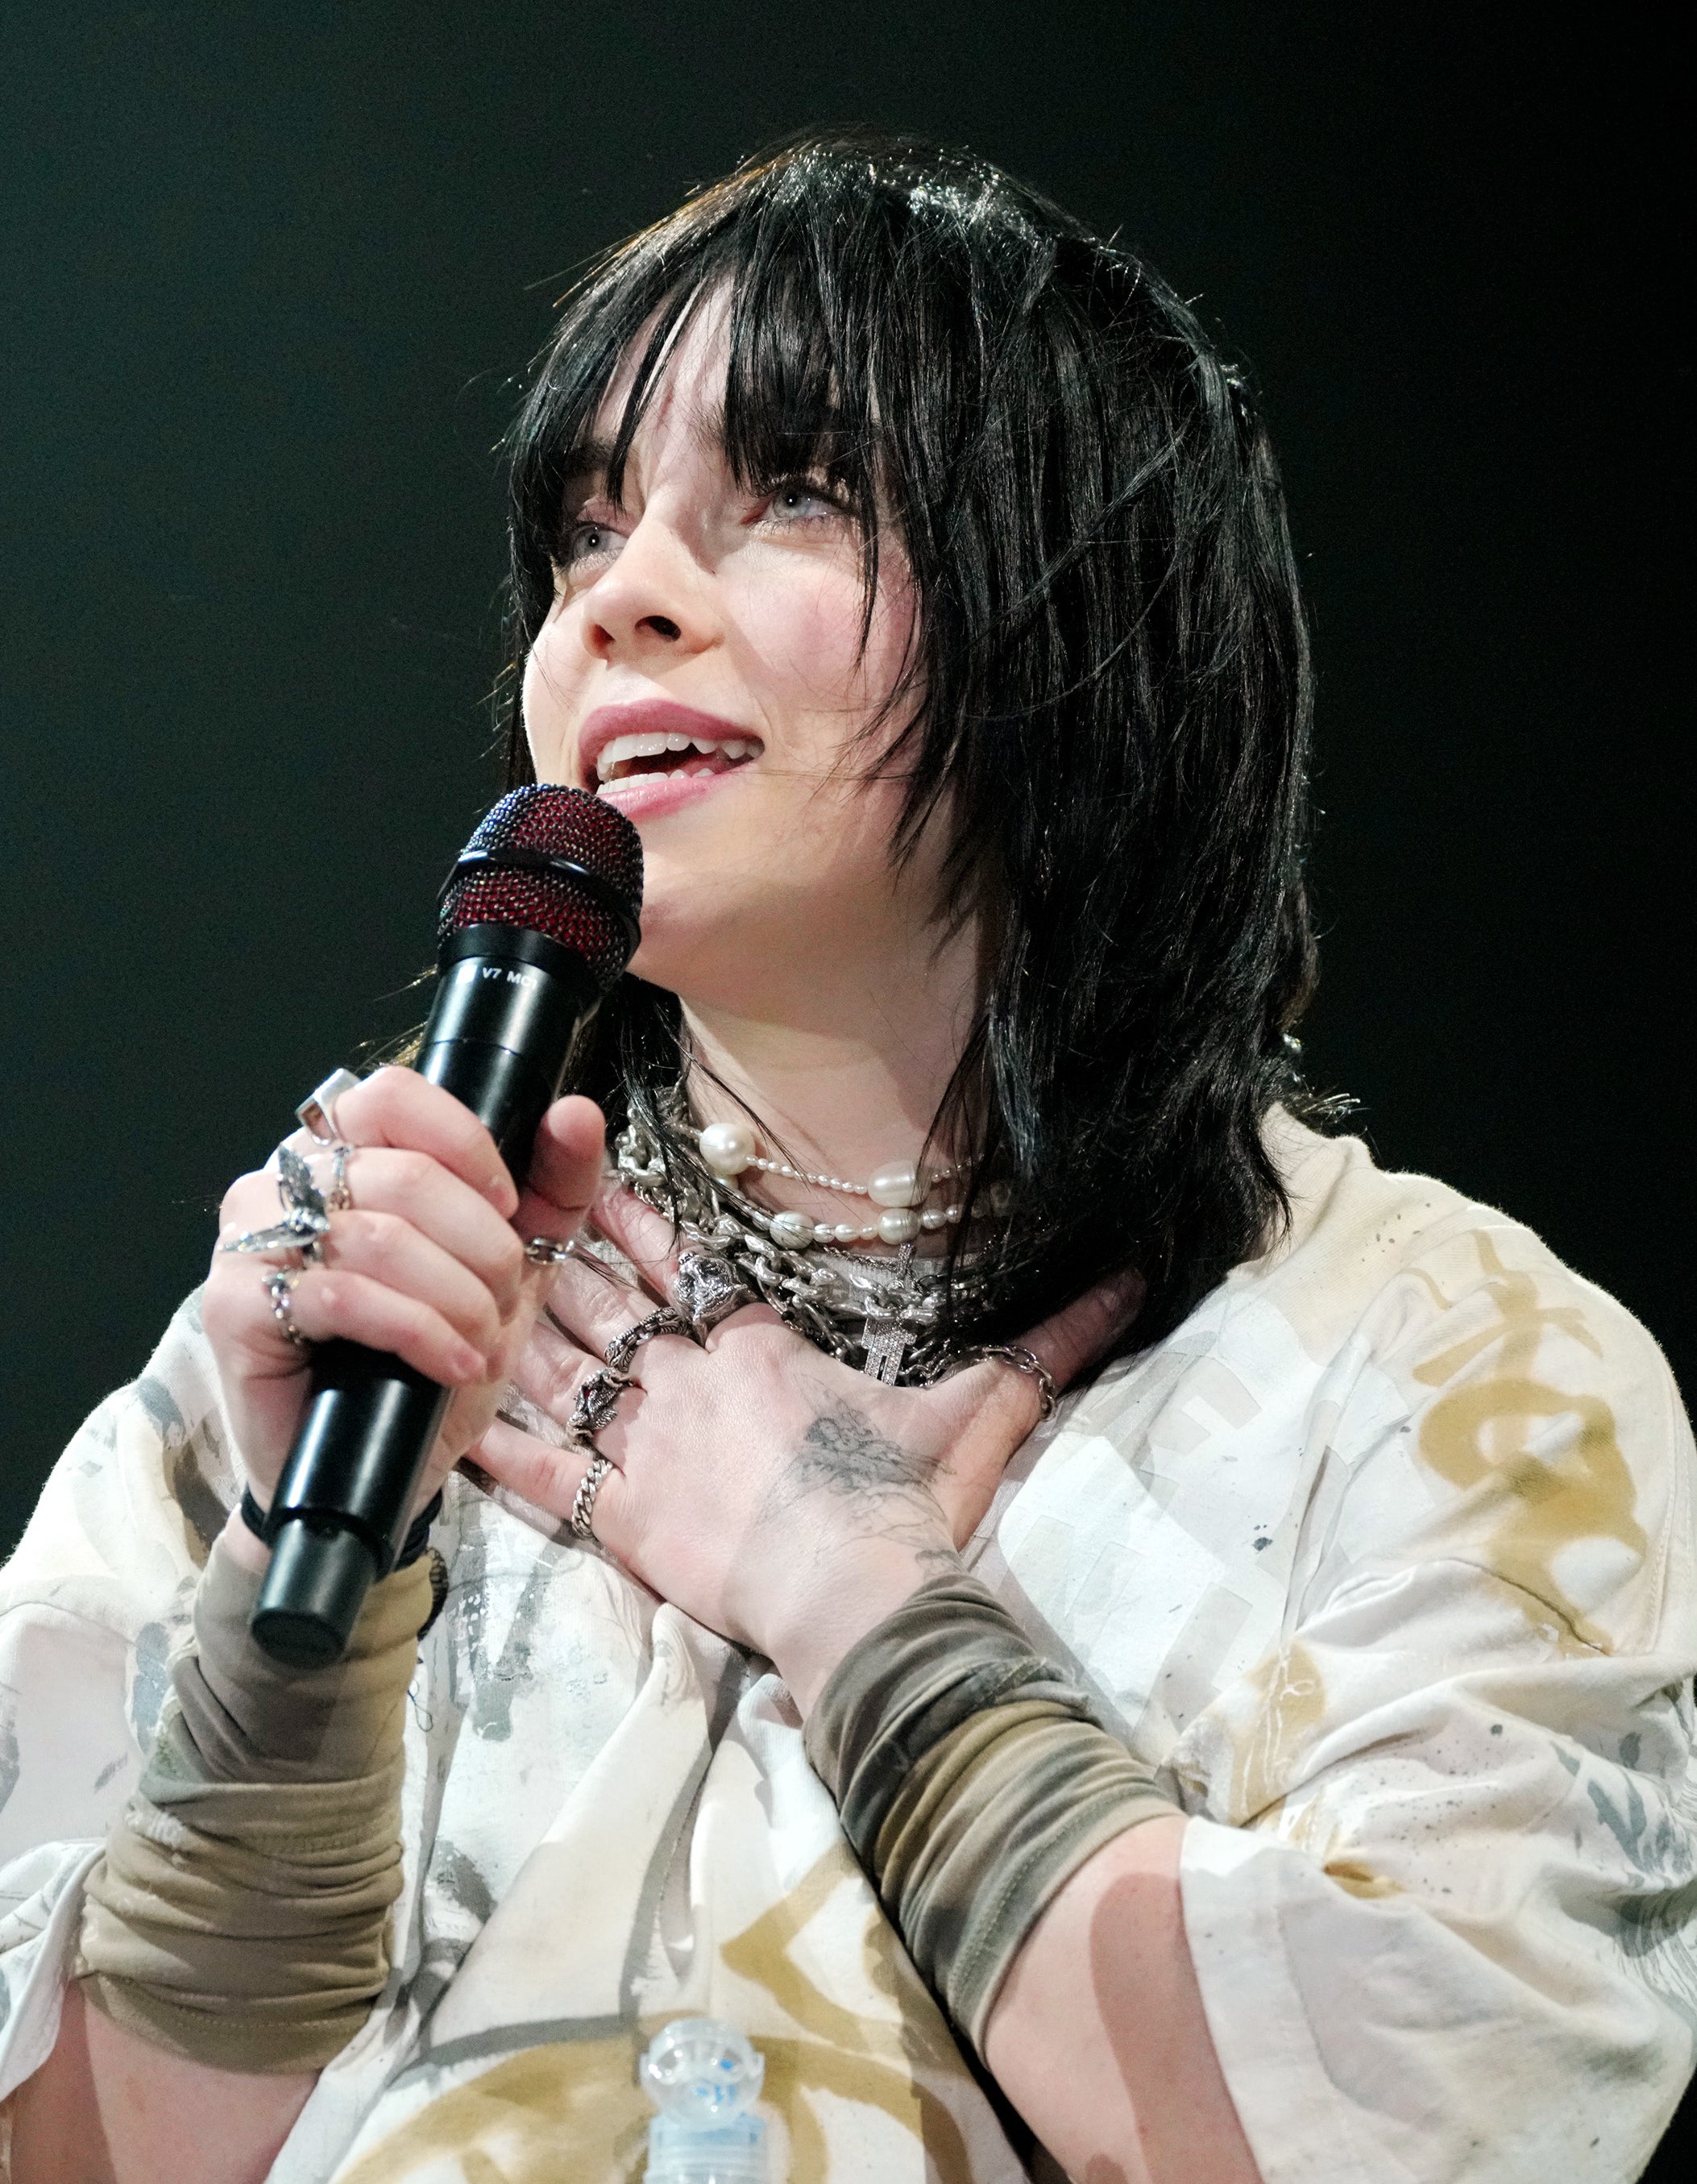 Close-up of Billie holding a microphone